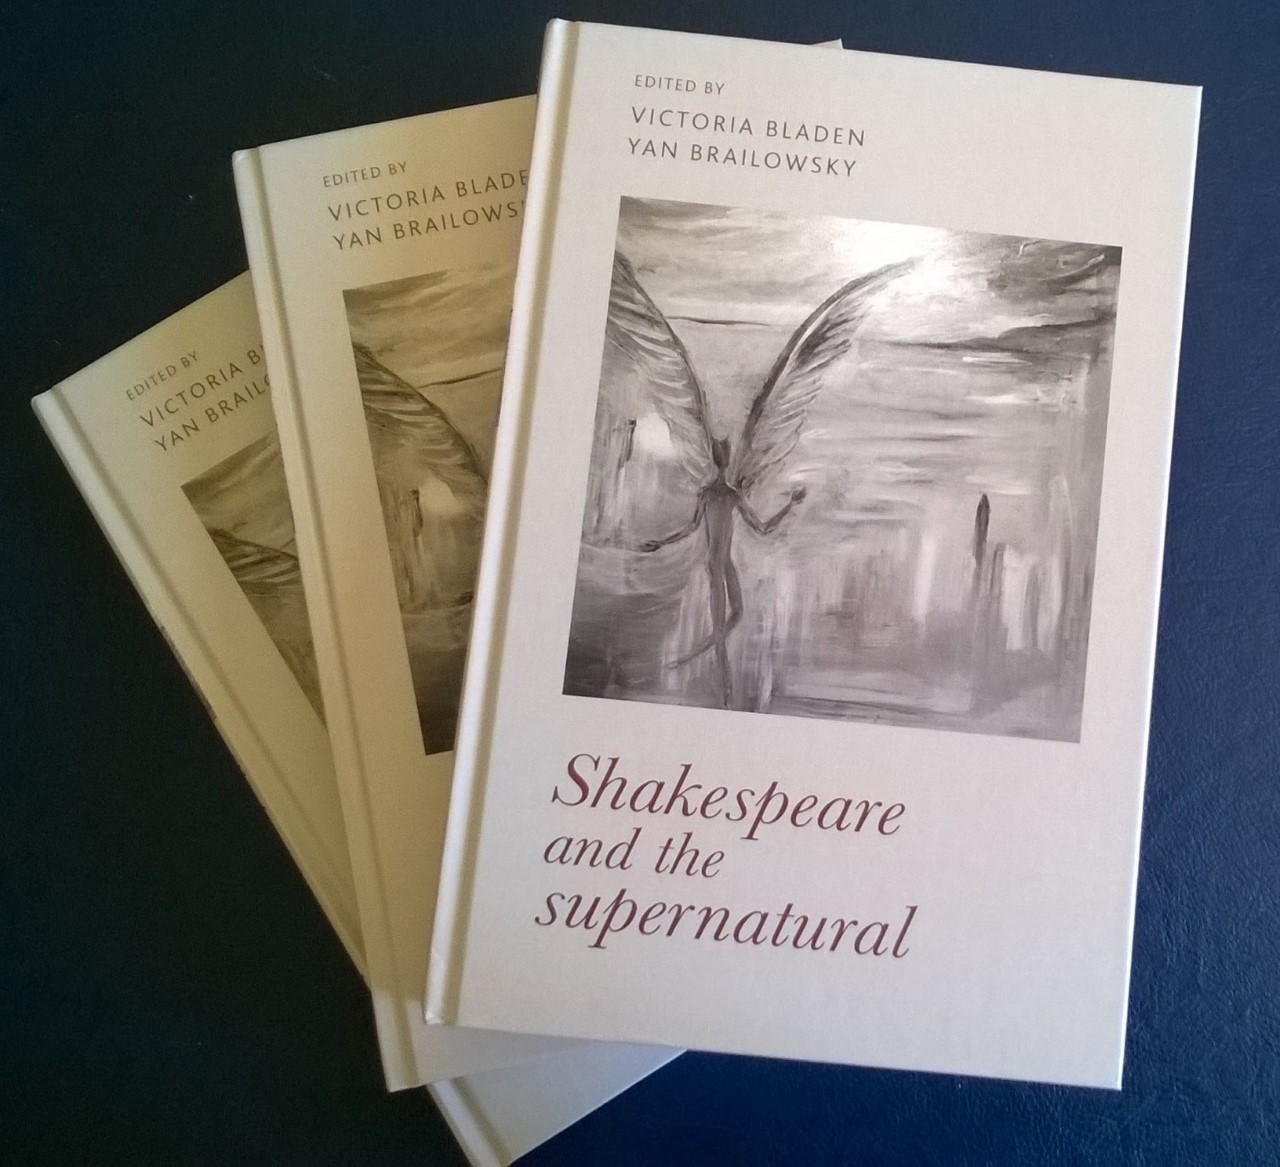 supernatural elements in shakespeare's plays essay